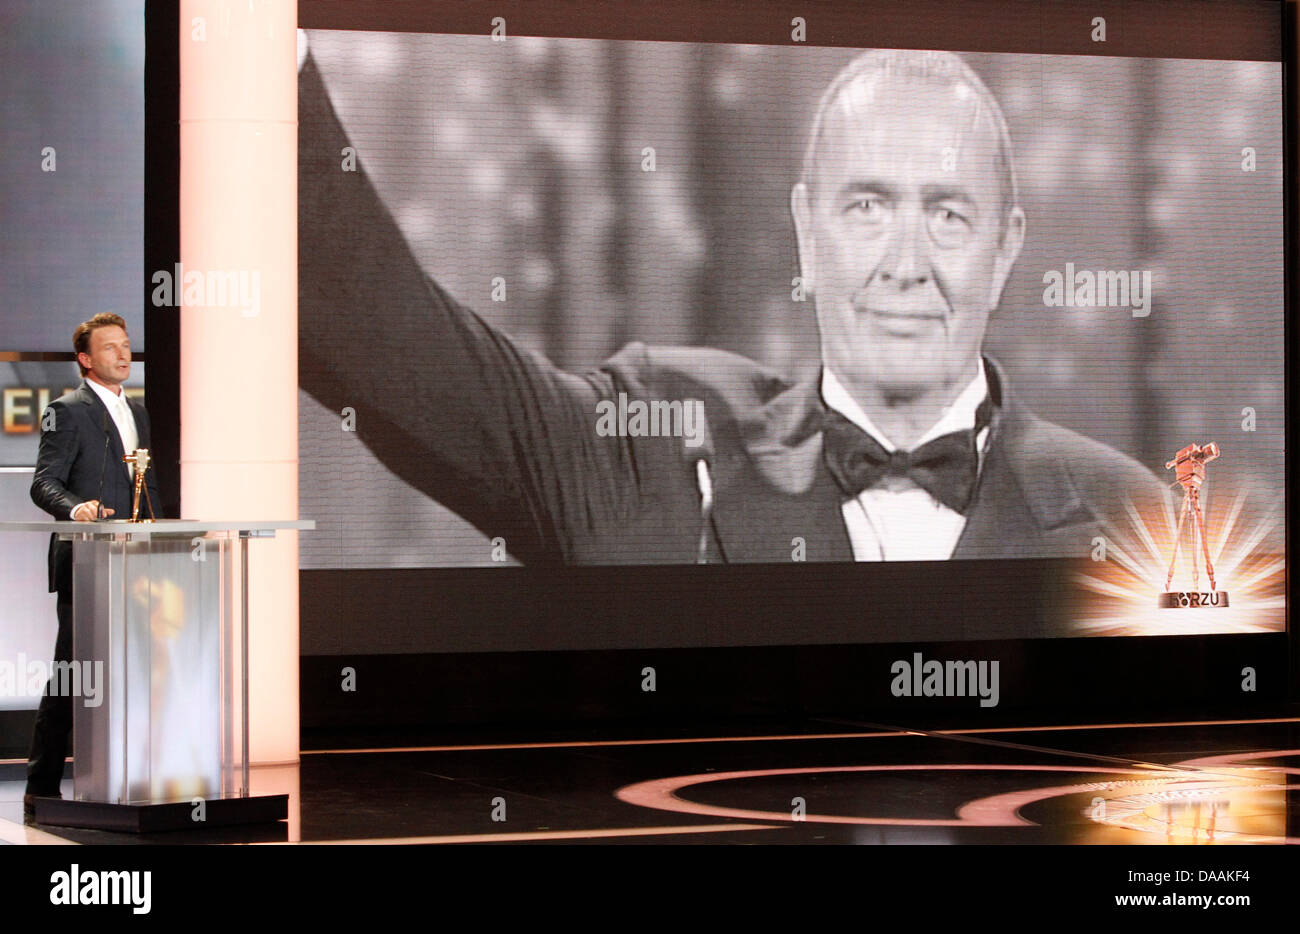 German actor Thomas Kretschmann appears on stage to accept an honorary award on behalf of Bernd Eichinger (pictured on screen) during the 46th Golden Camera award ceremony in Berlin, Germany, 5 February 2011. The award honours the audience's favourites from film, television, sports and media. Photo: Tobias Schwarz dpa/lbn Stock Photo